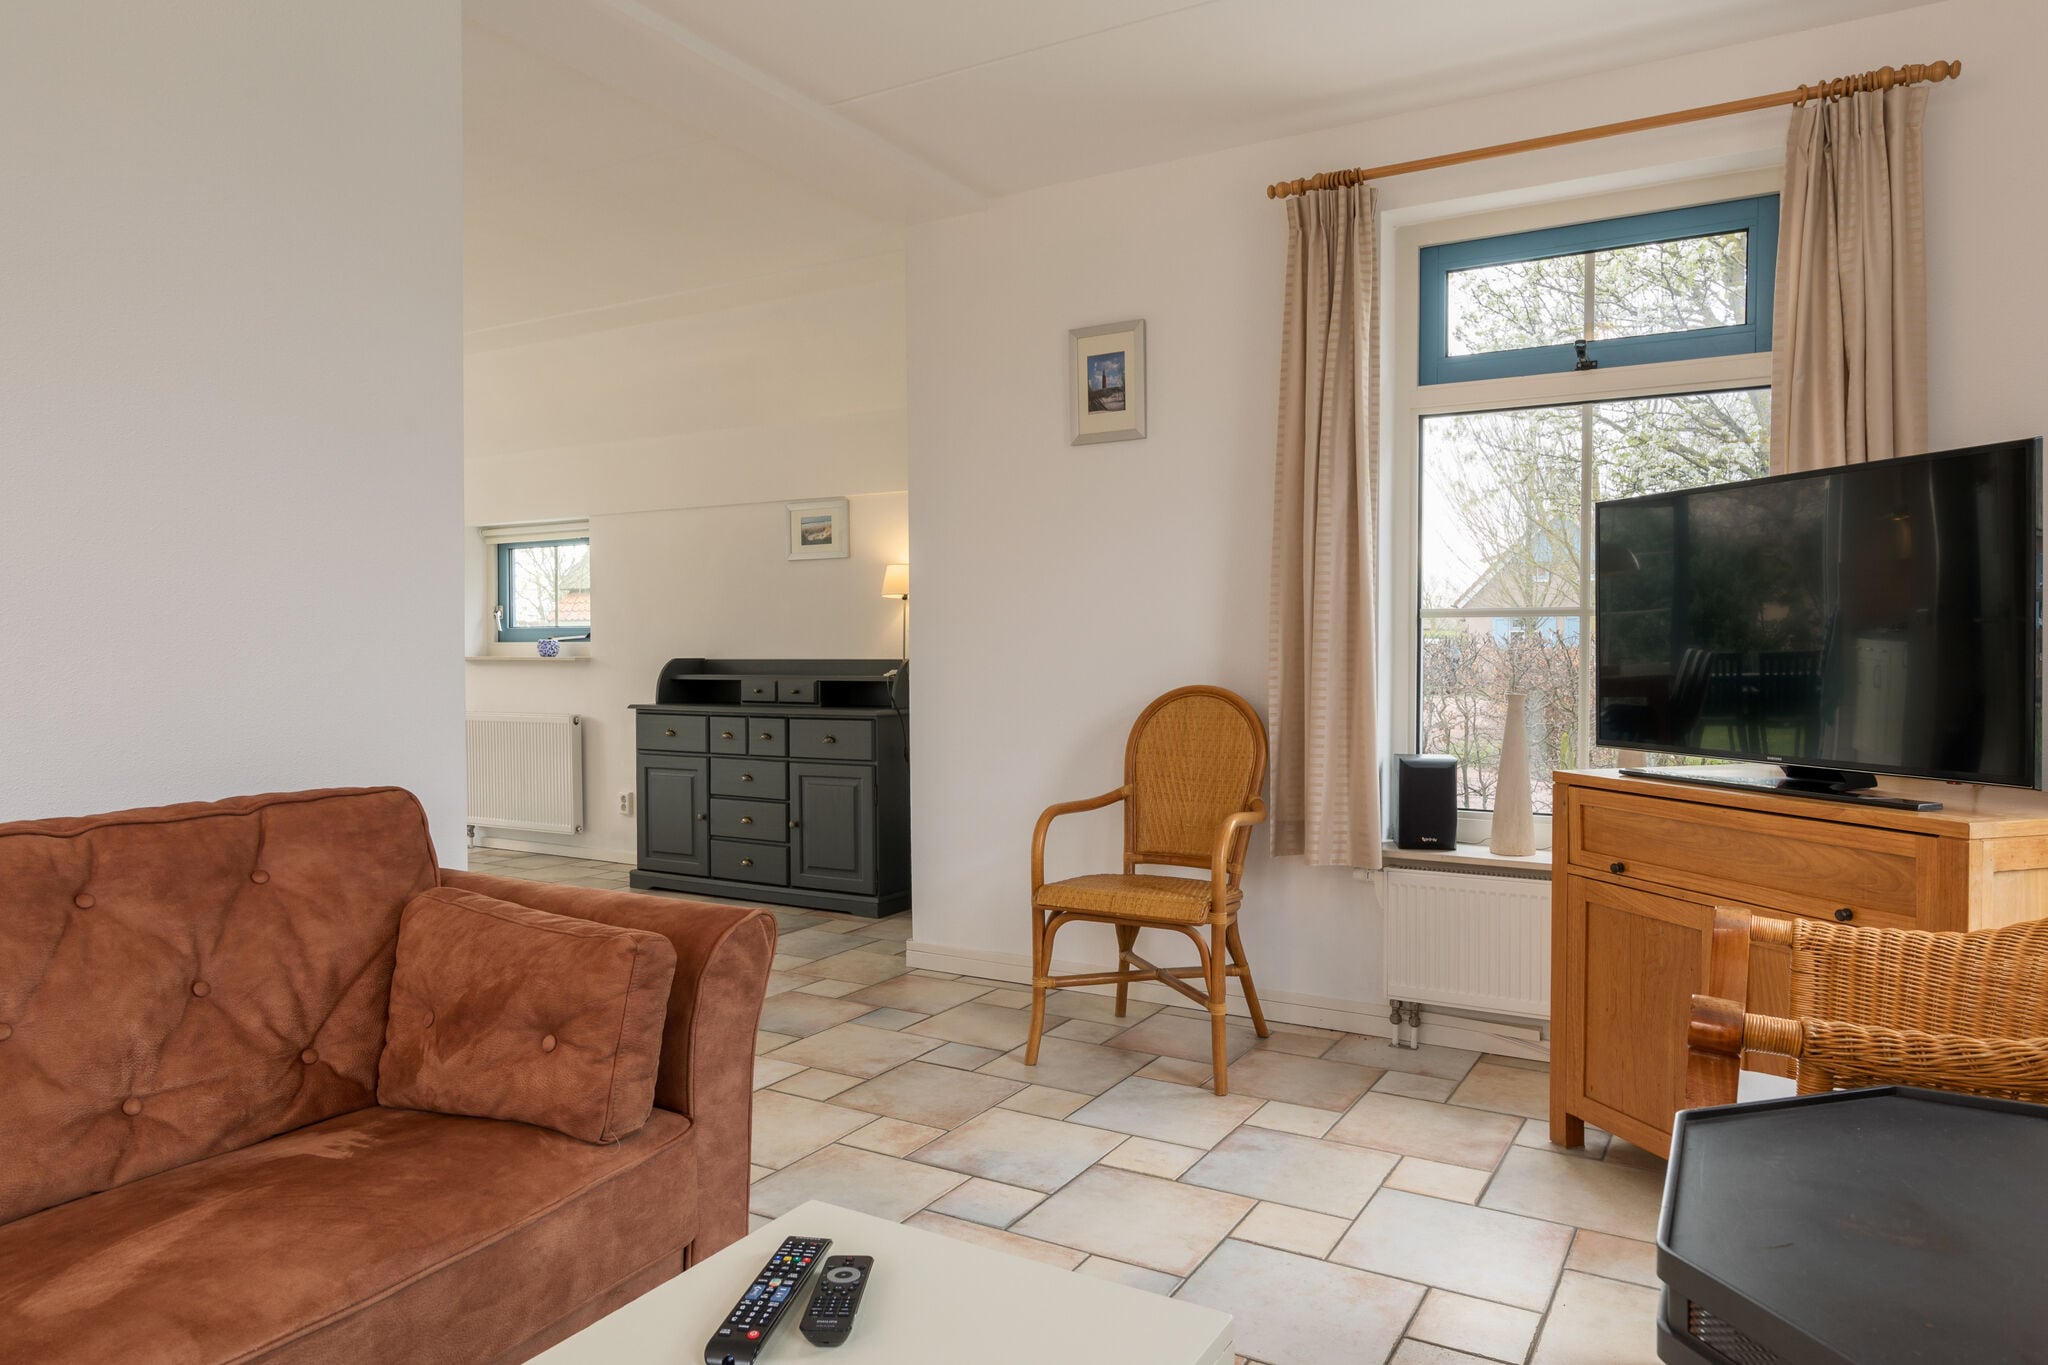 Traditional villa with dishwasher, on Texel, sea at 2 km.